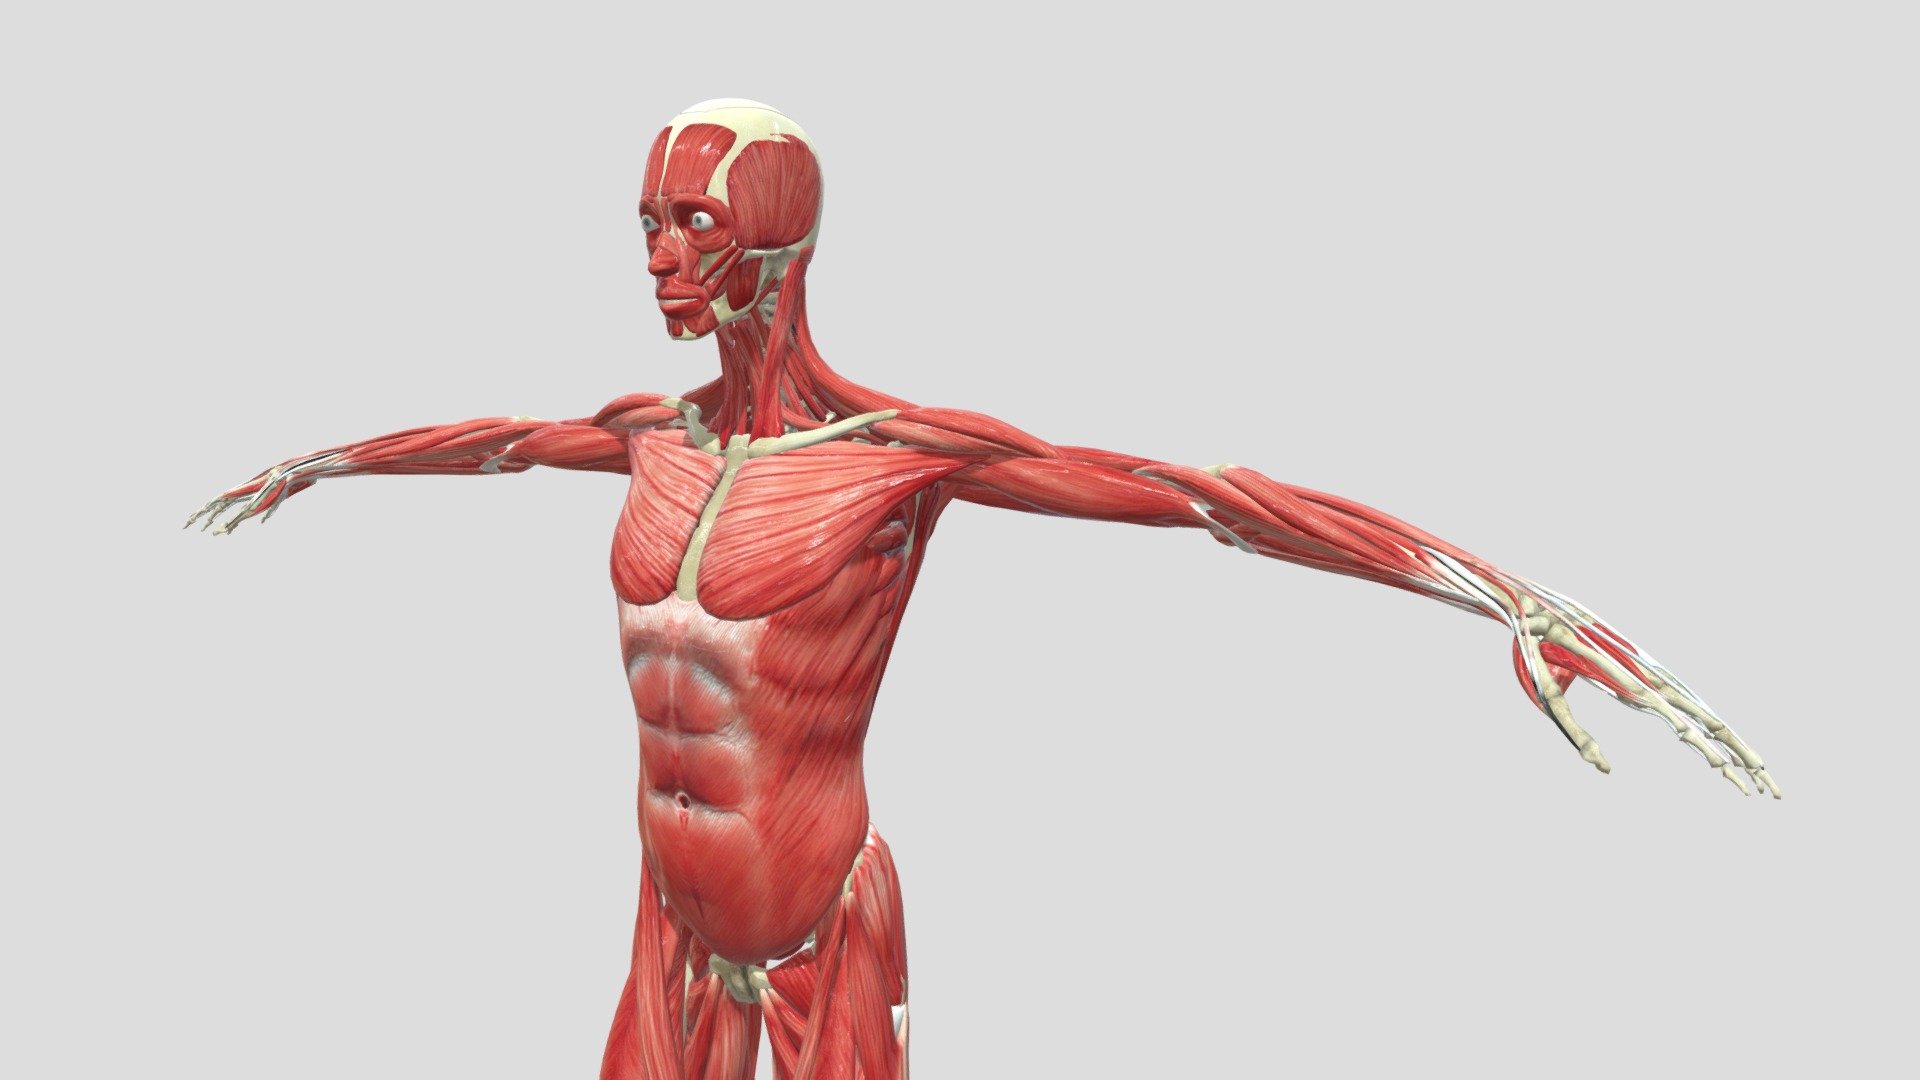 Human Muscular and Skeletal System.

Another additional file is Rigged in Blender - Human Muscular Skeletal System Rigged in Blender - 3D model by Clacydarch 3d model